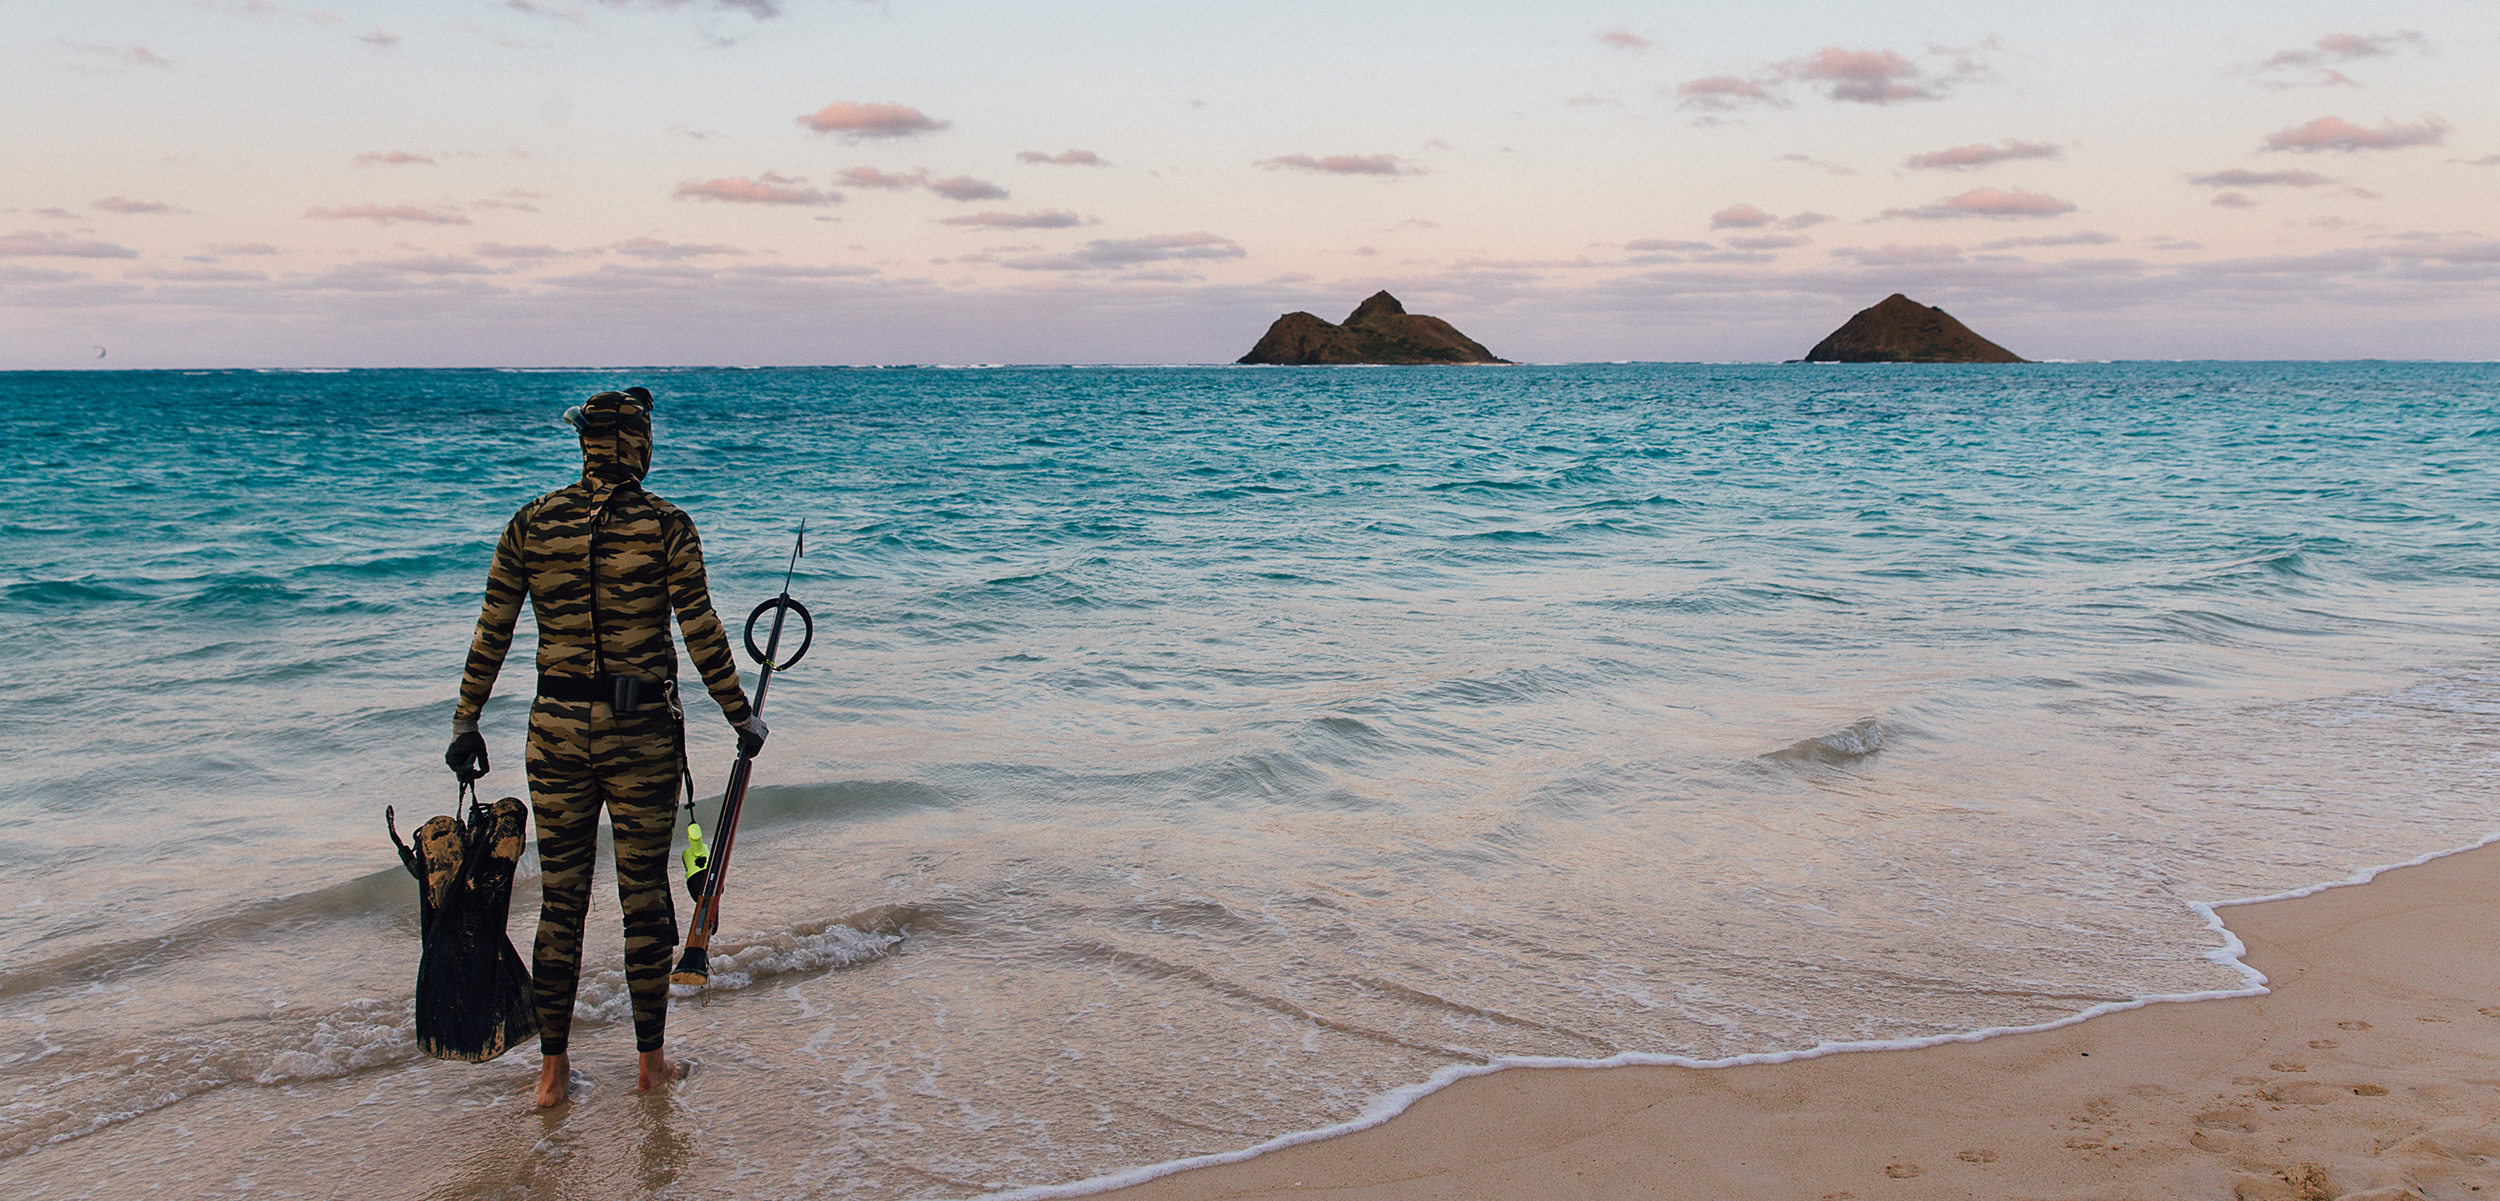 For some Hawaiian residents like Kellen Parenzin of O‘ahu, spearfishing is about participating in and forging a spiritual connection to the ecosystem beneath the waves. Photo by Meagan Suzuki